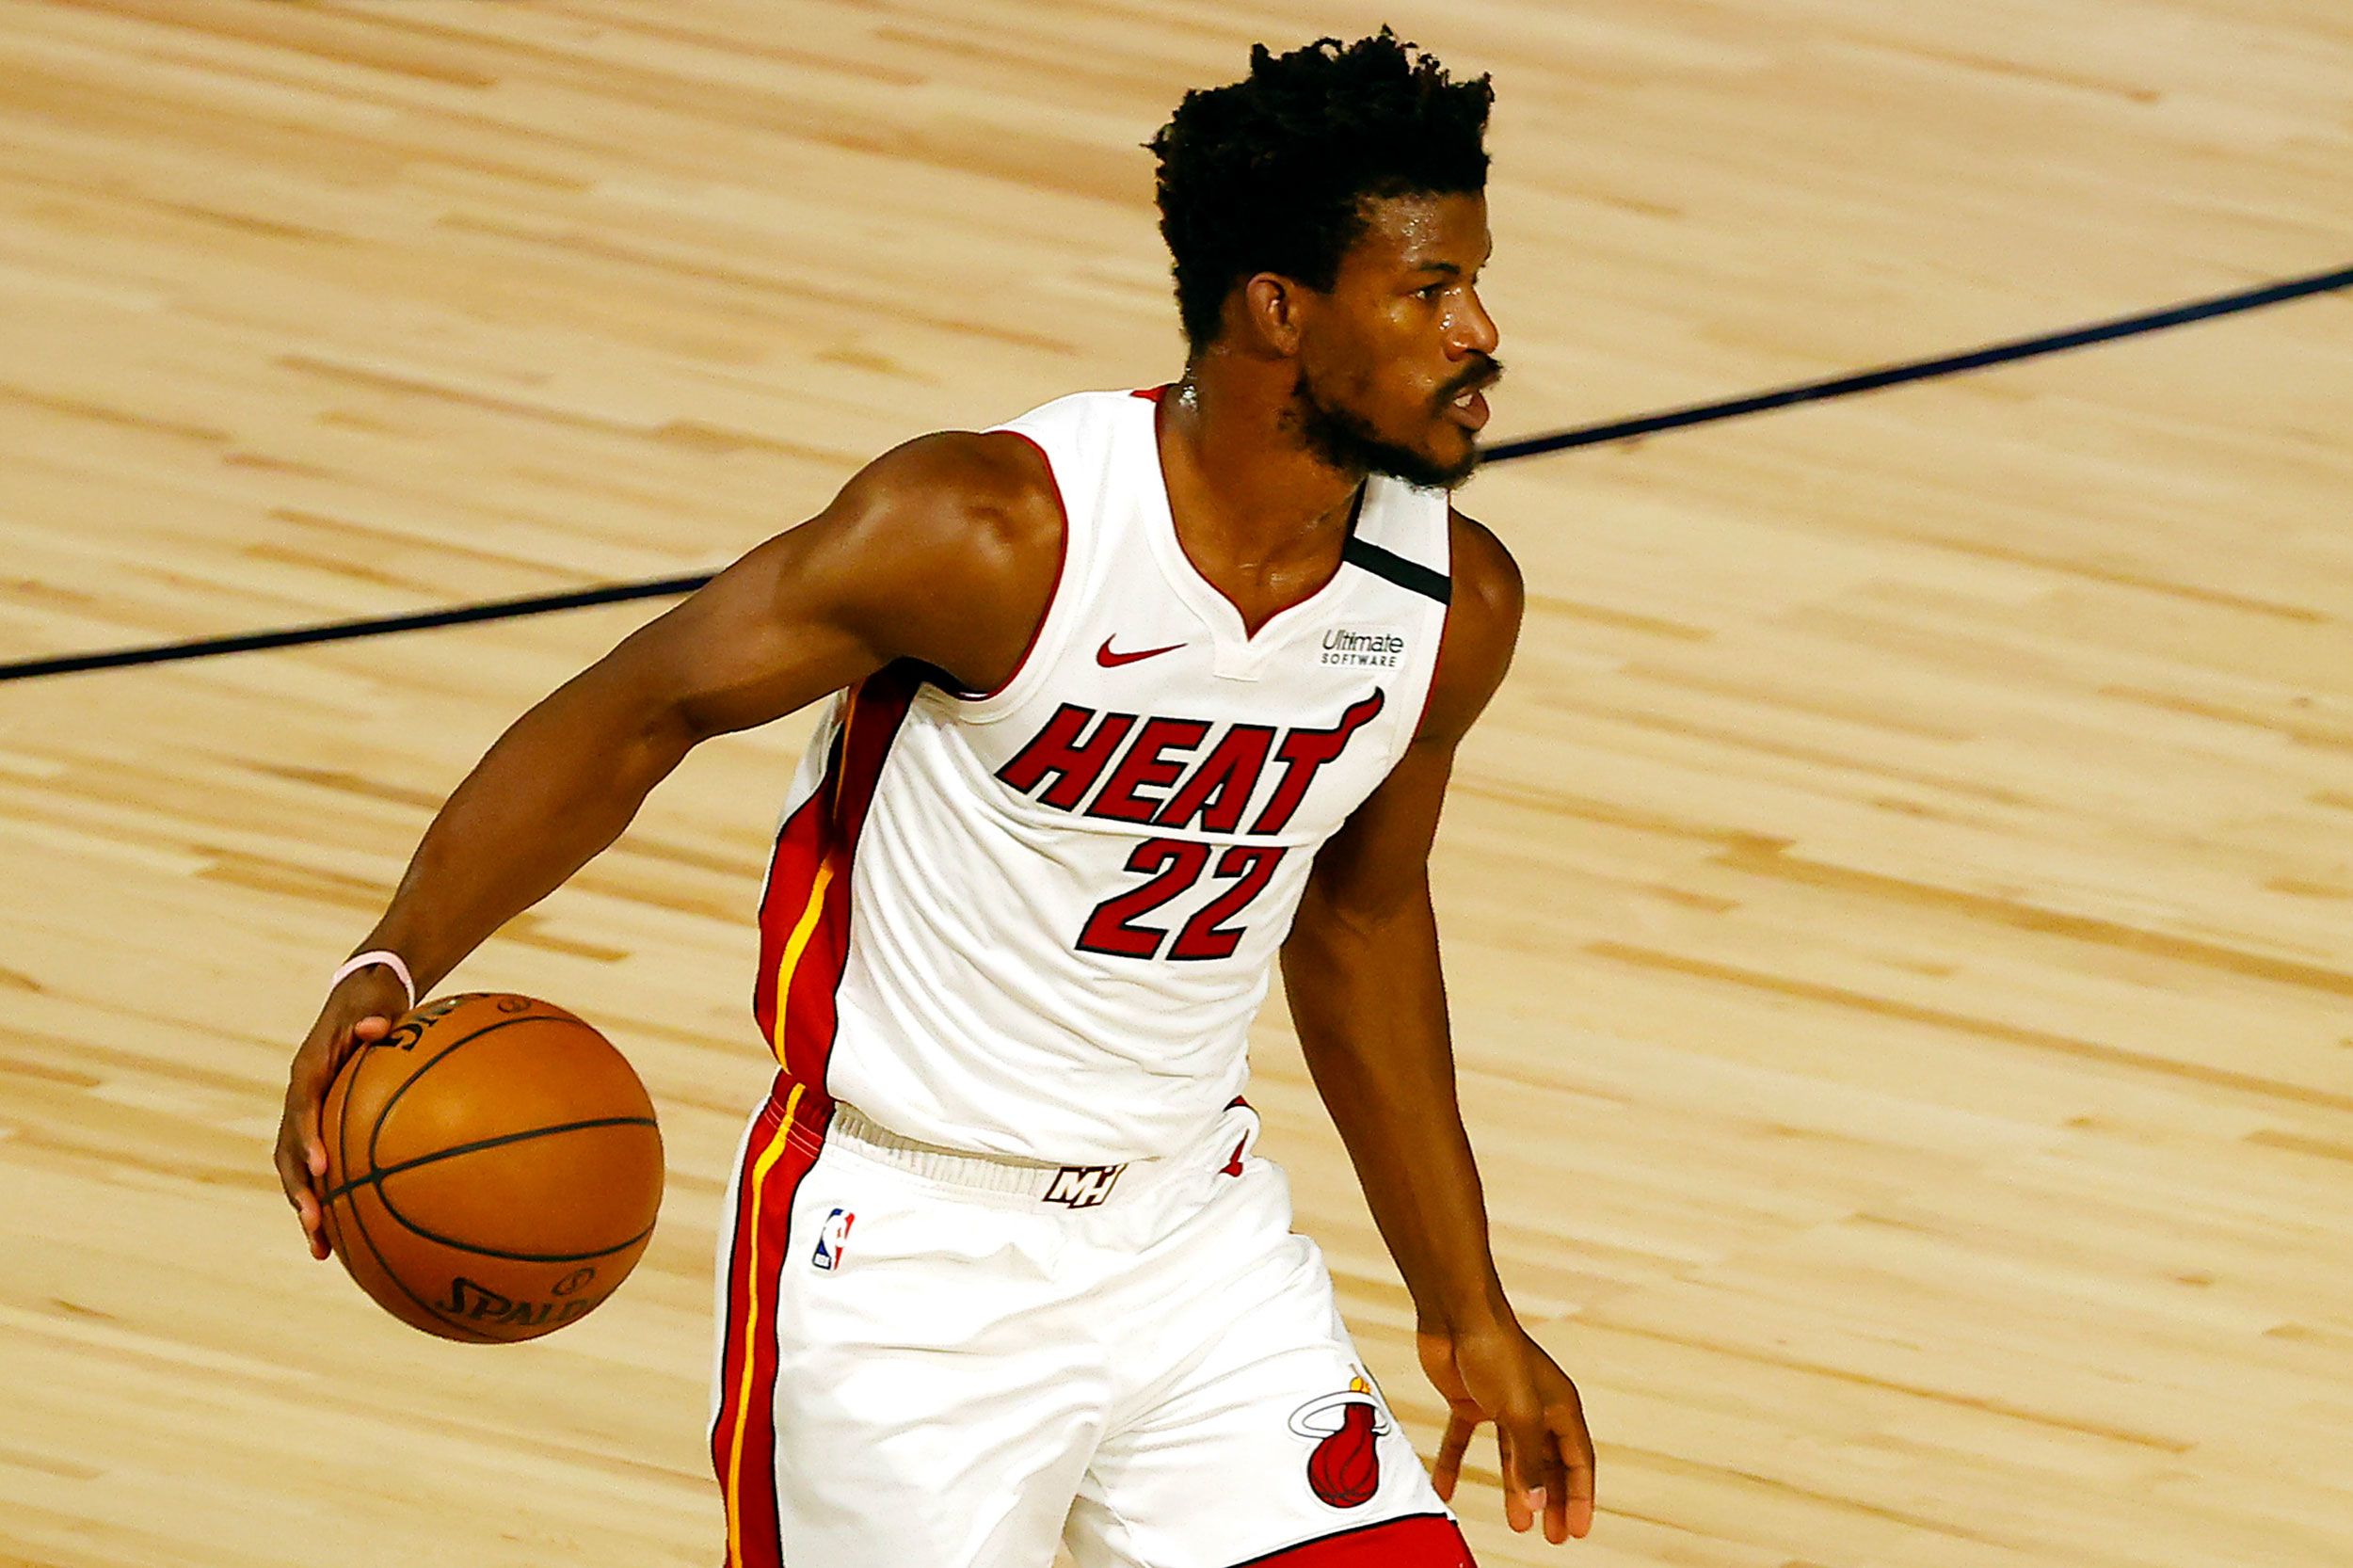 Why Jimmy Butler started the Heat-Nuggets game without a name on